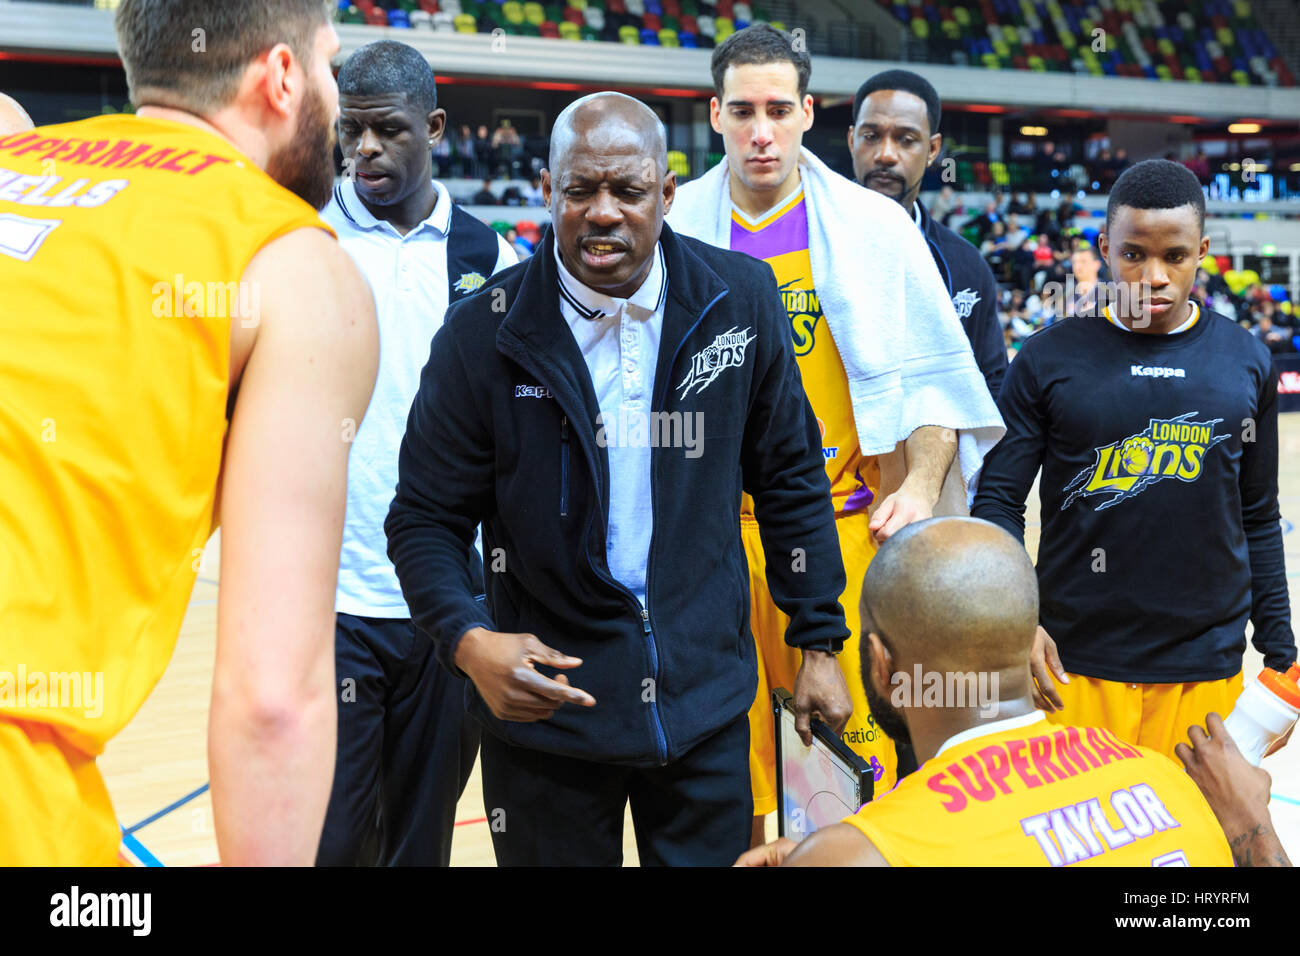 Copper Box Arena, London, 5th Mar 2017. Lions' coach Nigel Lloyd is not happy with his team's performance. Tensions run high in the BBL Championship game between home team London Lions and visitors Leeds Force. London Lions loose 81-92. Credit: Imageplotter News and Sports/Alamy Live News Stock Photo